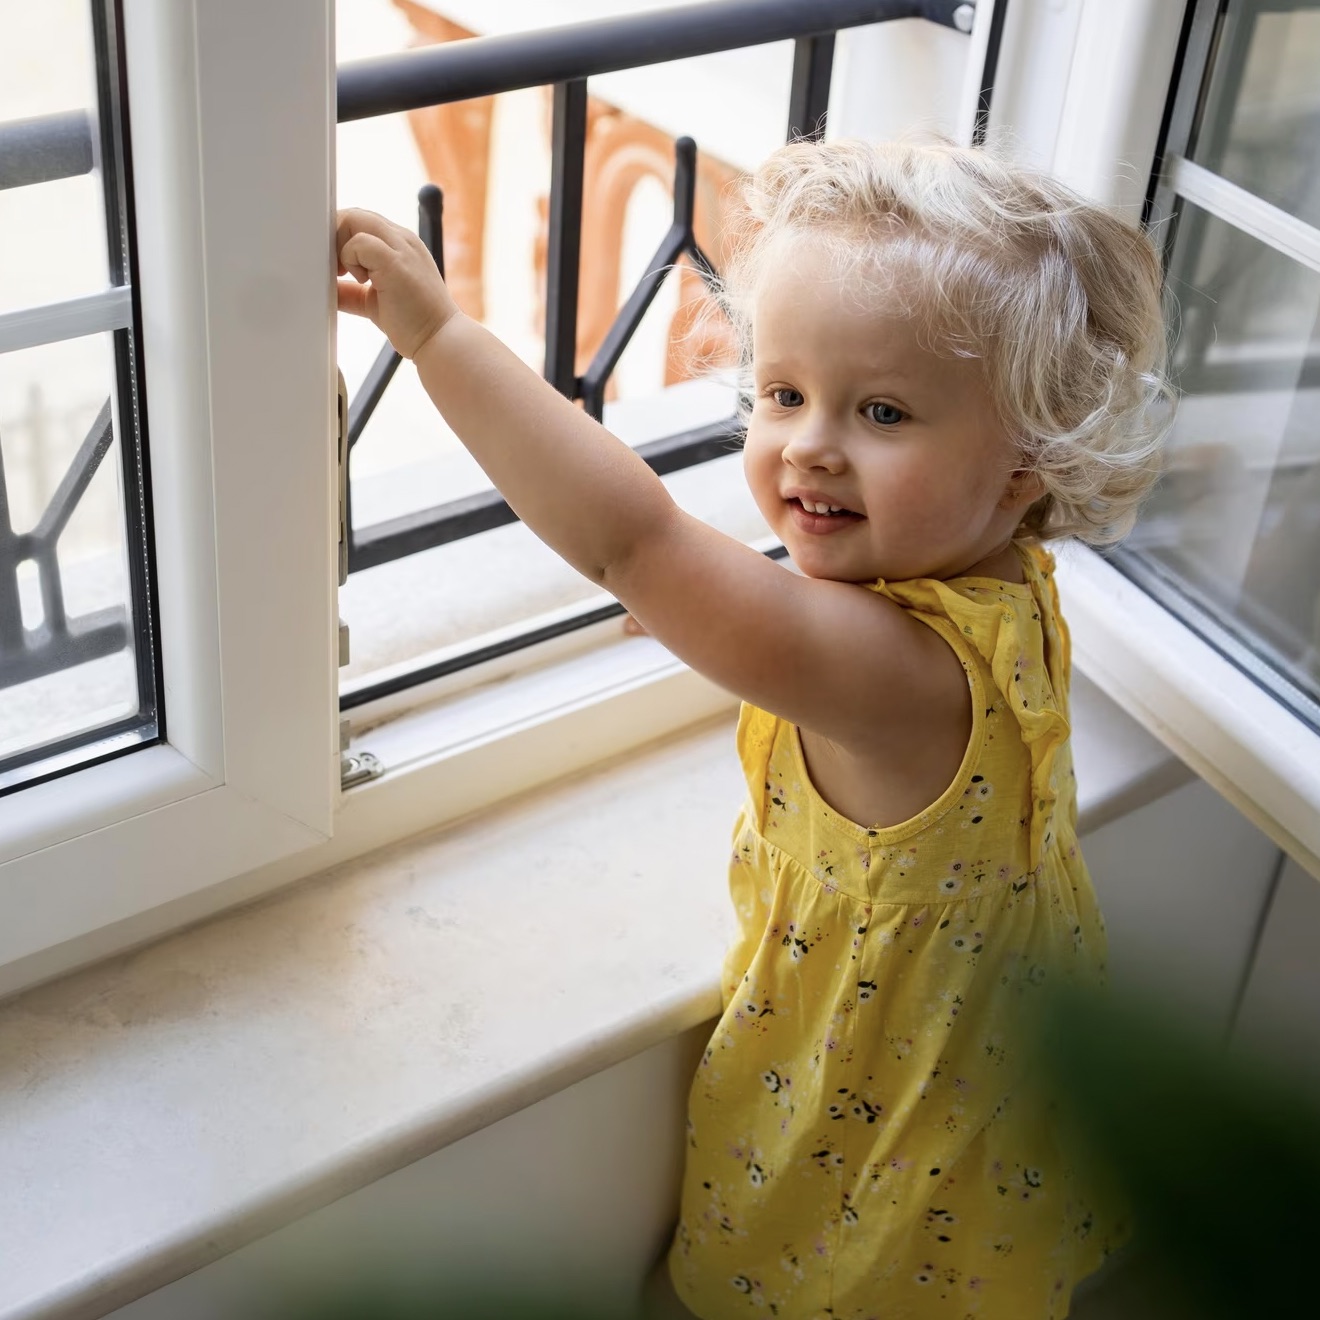 Toddler girl at open window with protective railing